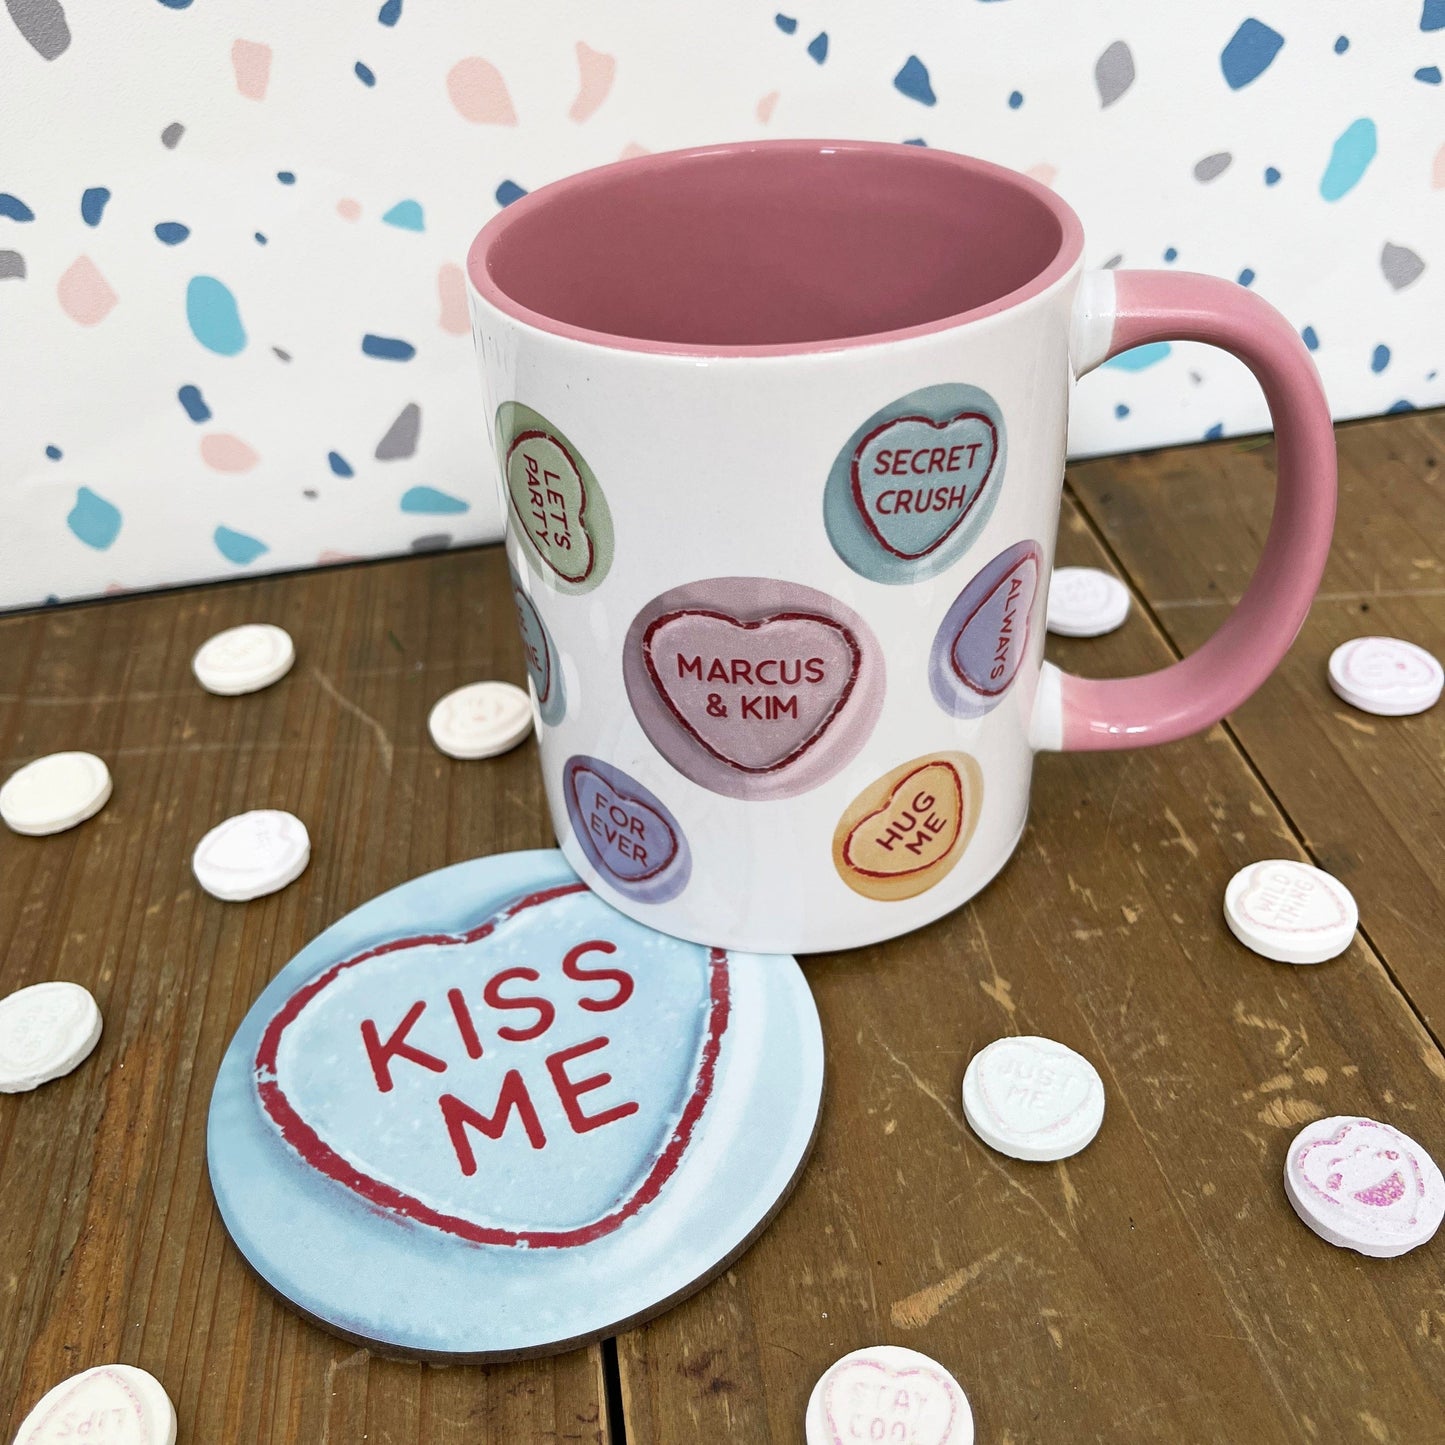 Personalised Love Hearts Mug and Coaster | Cute Customised Gift | Girlfriend Couple Engagement or Wedding Present